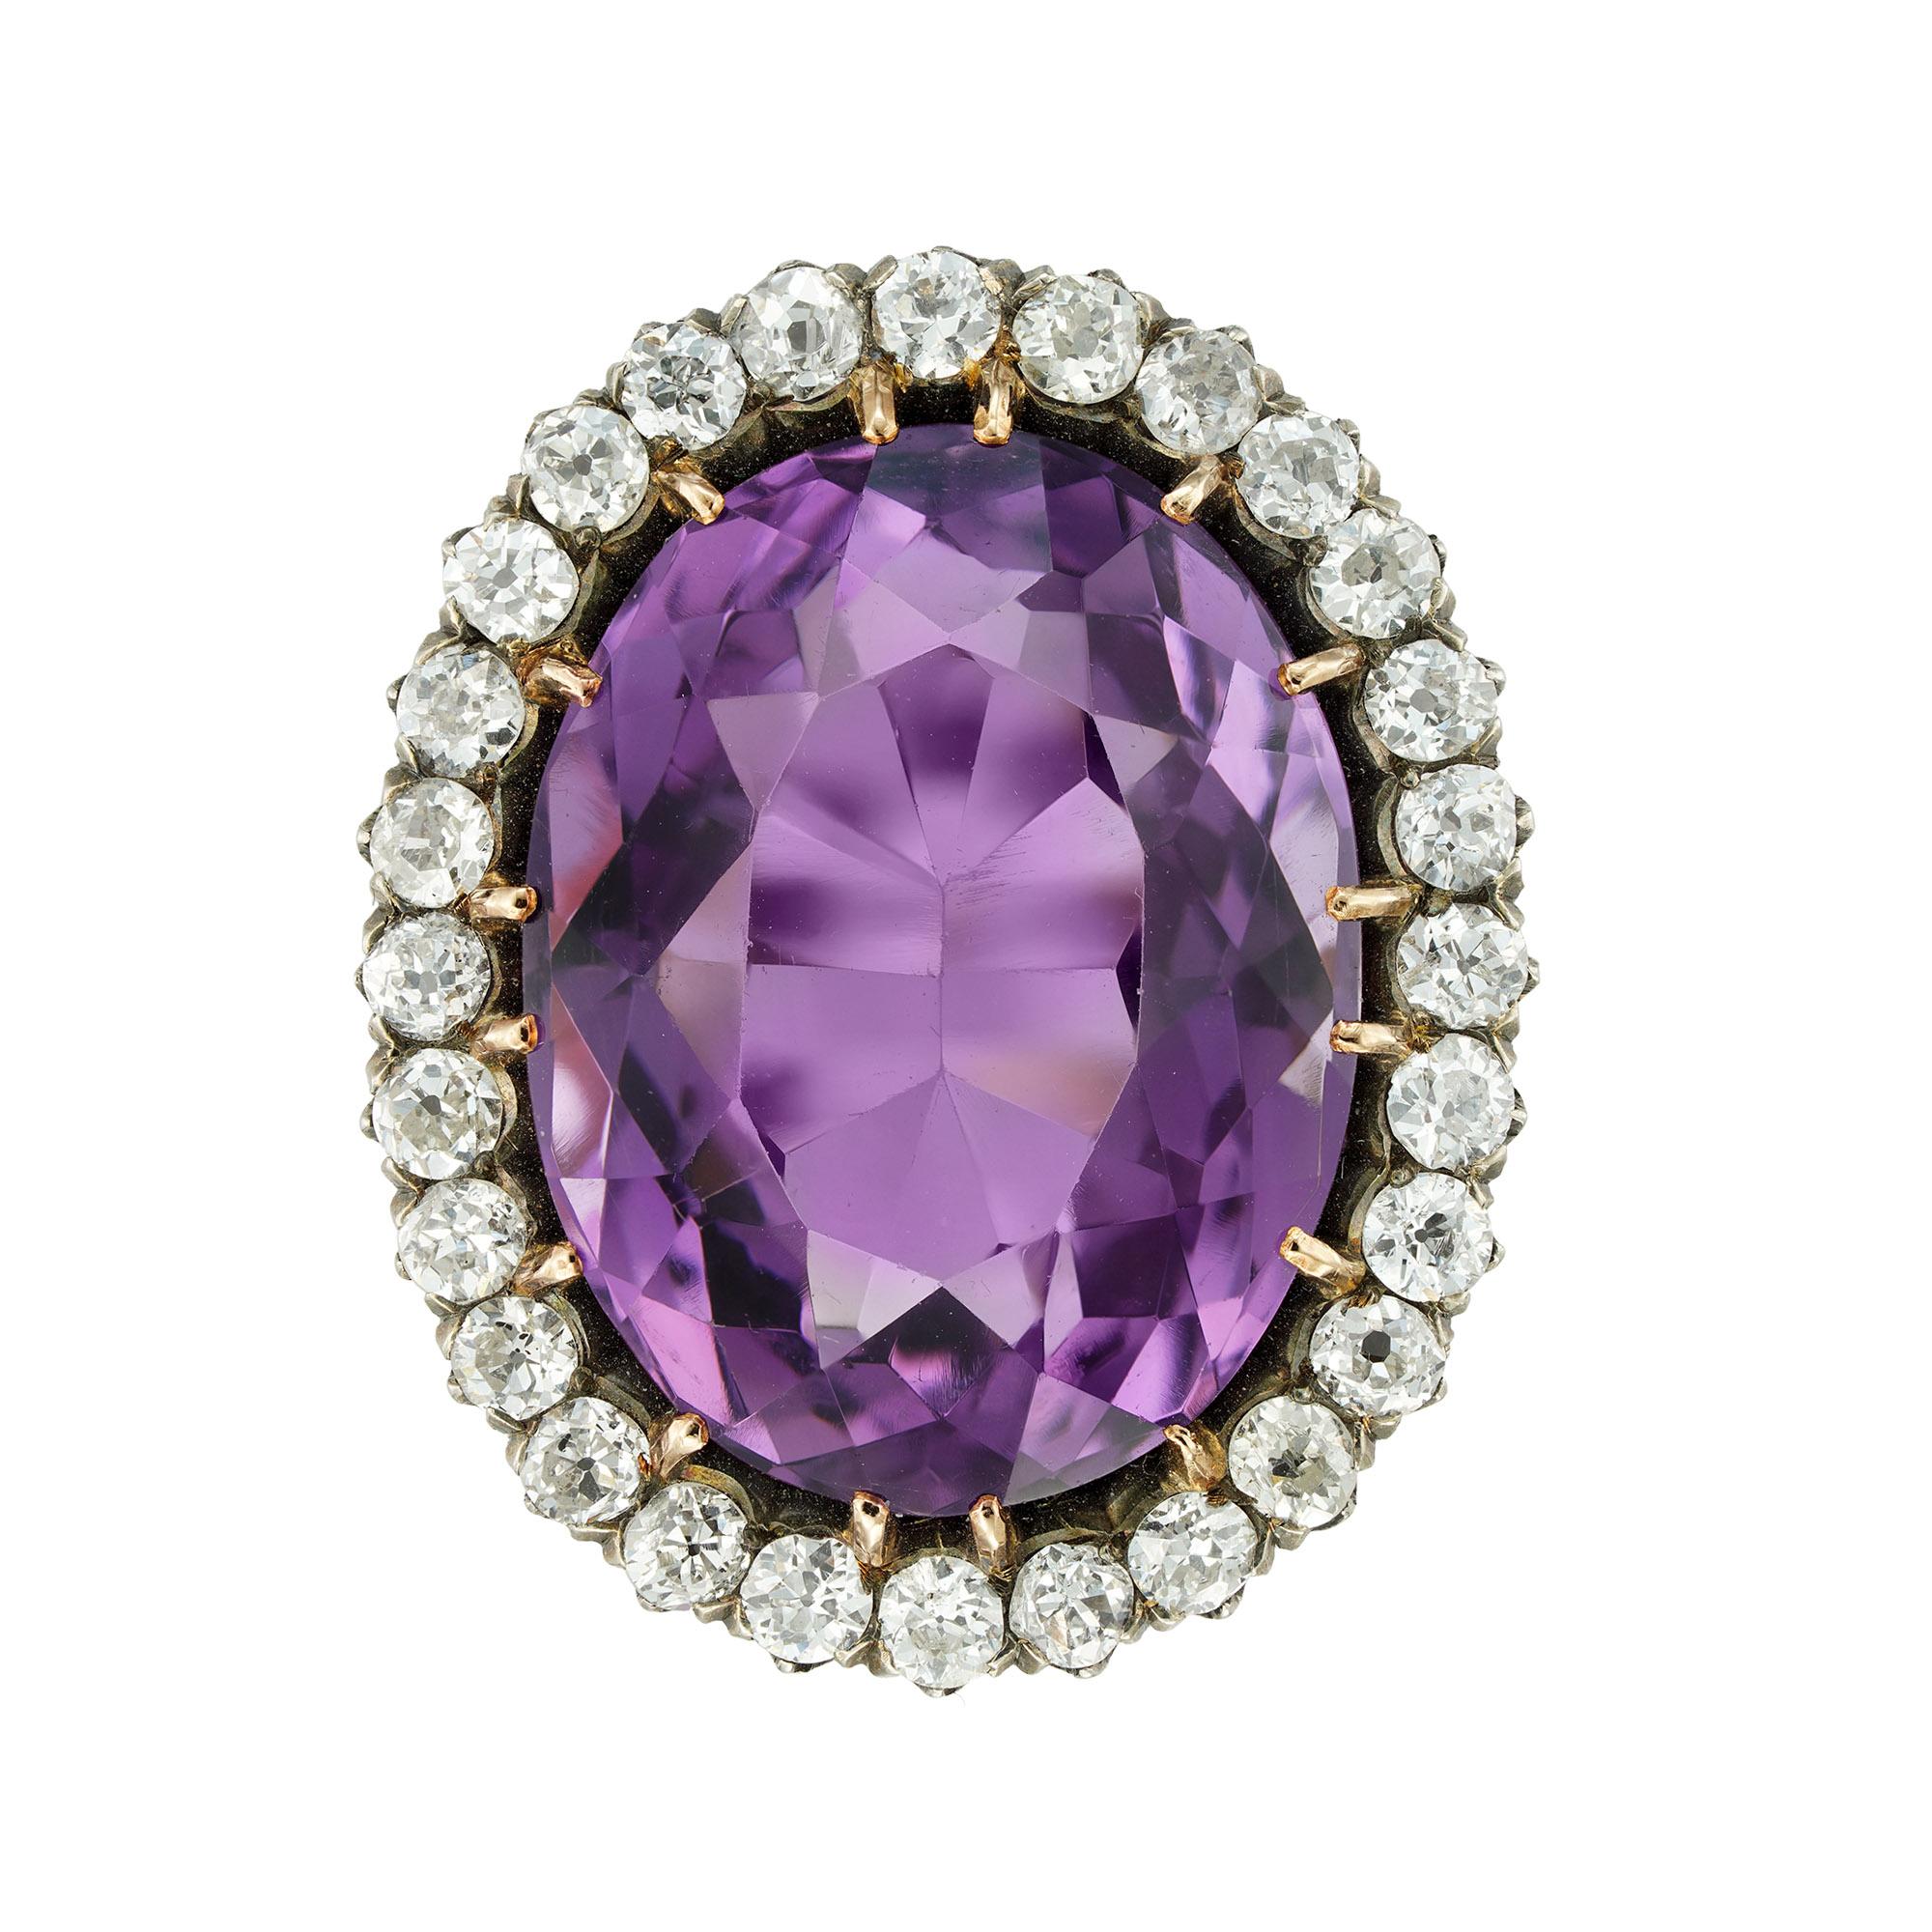 A late Victorian amethyst and diamond cluster ring, the oval faceted amethyst weighing 25.5 carats surrounded by twenty-eight old European-cut diamonds estimated to weigh 2 carats in total, all claw-set in silver and yellow gold, to gold penwork